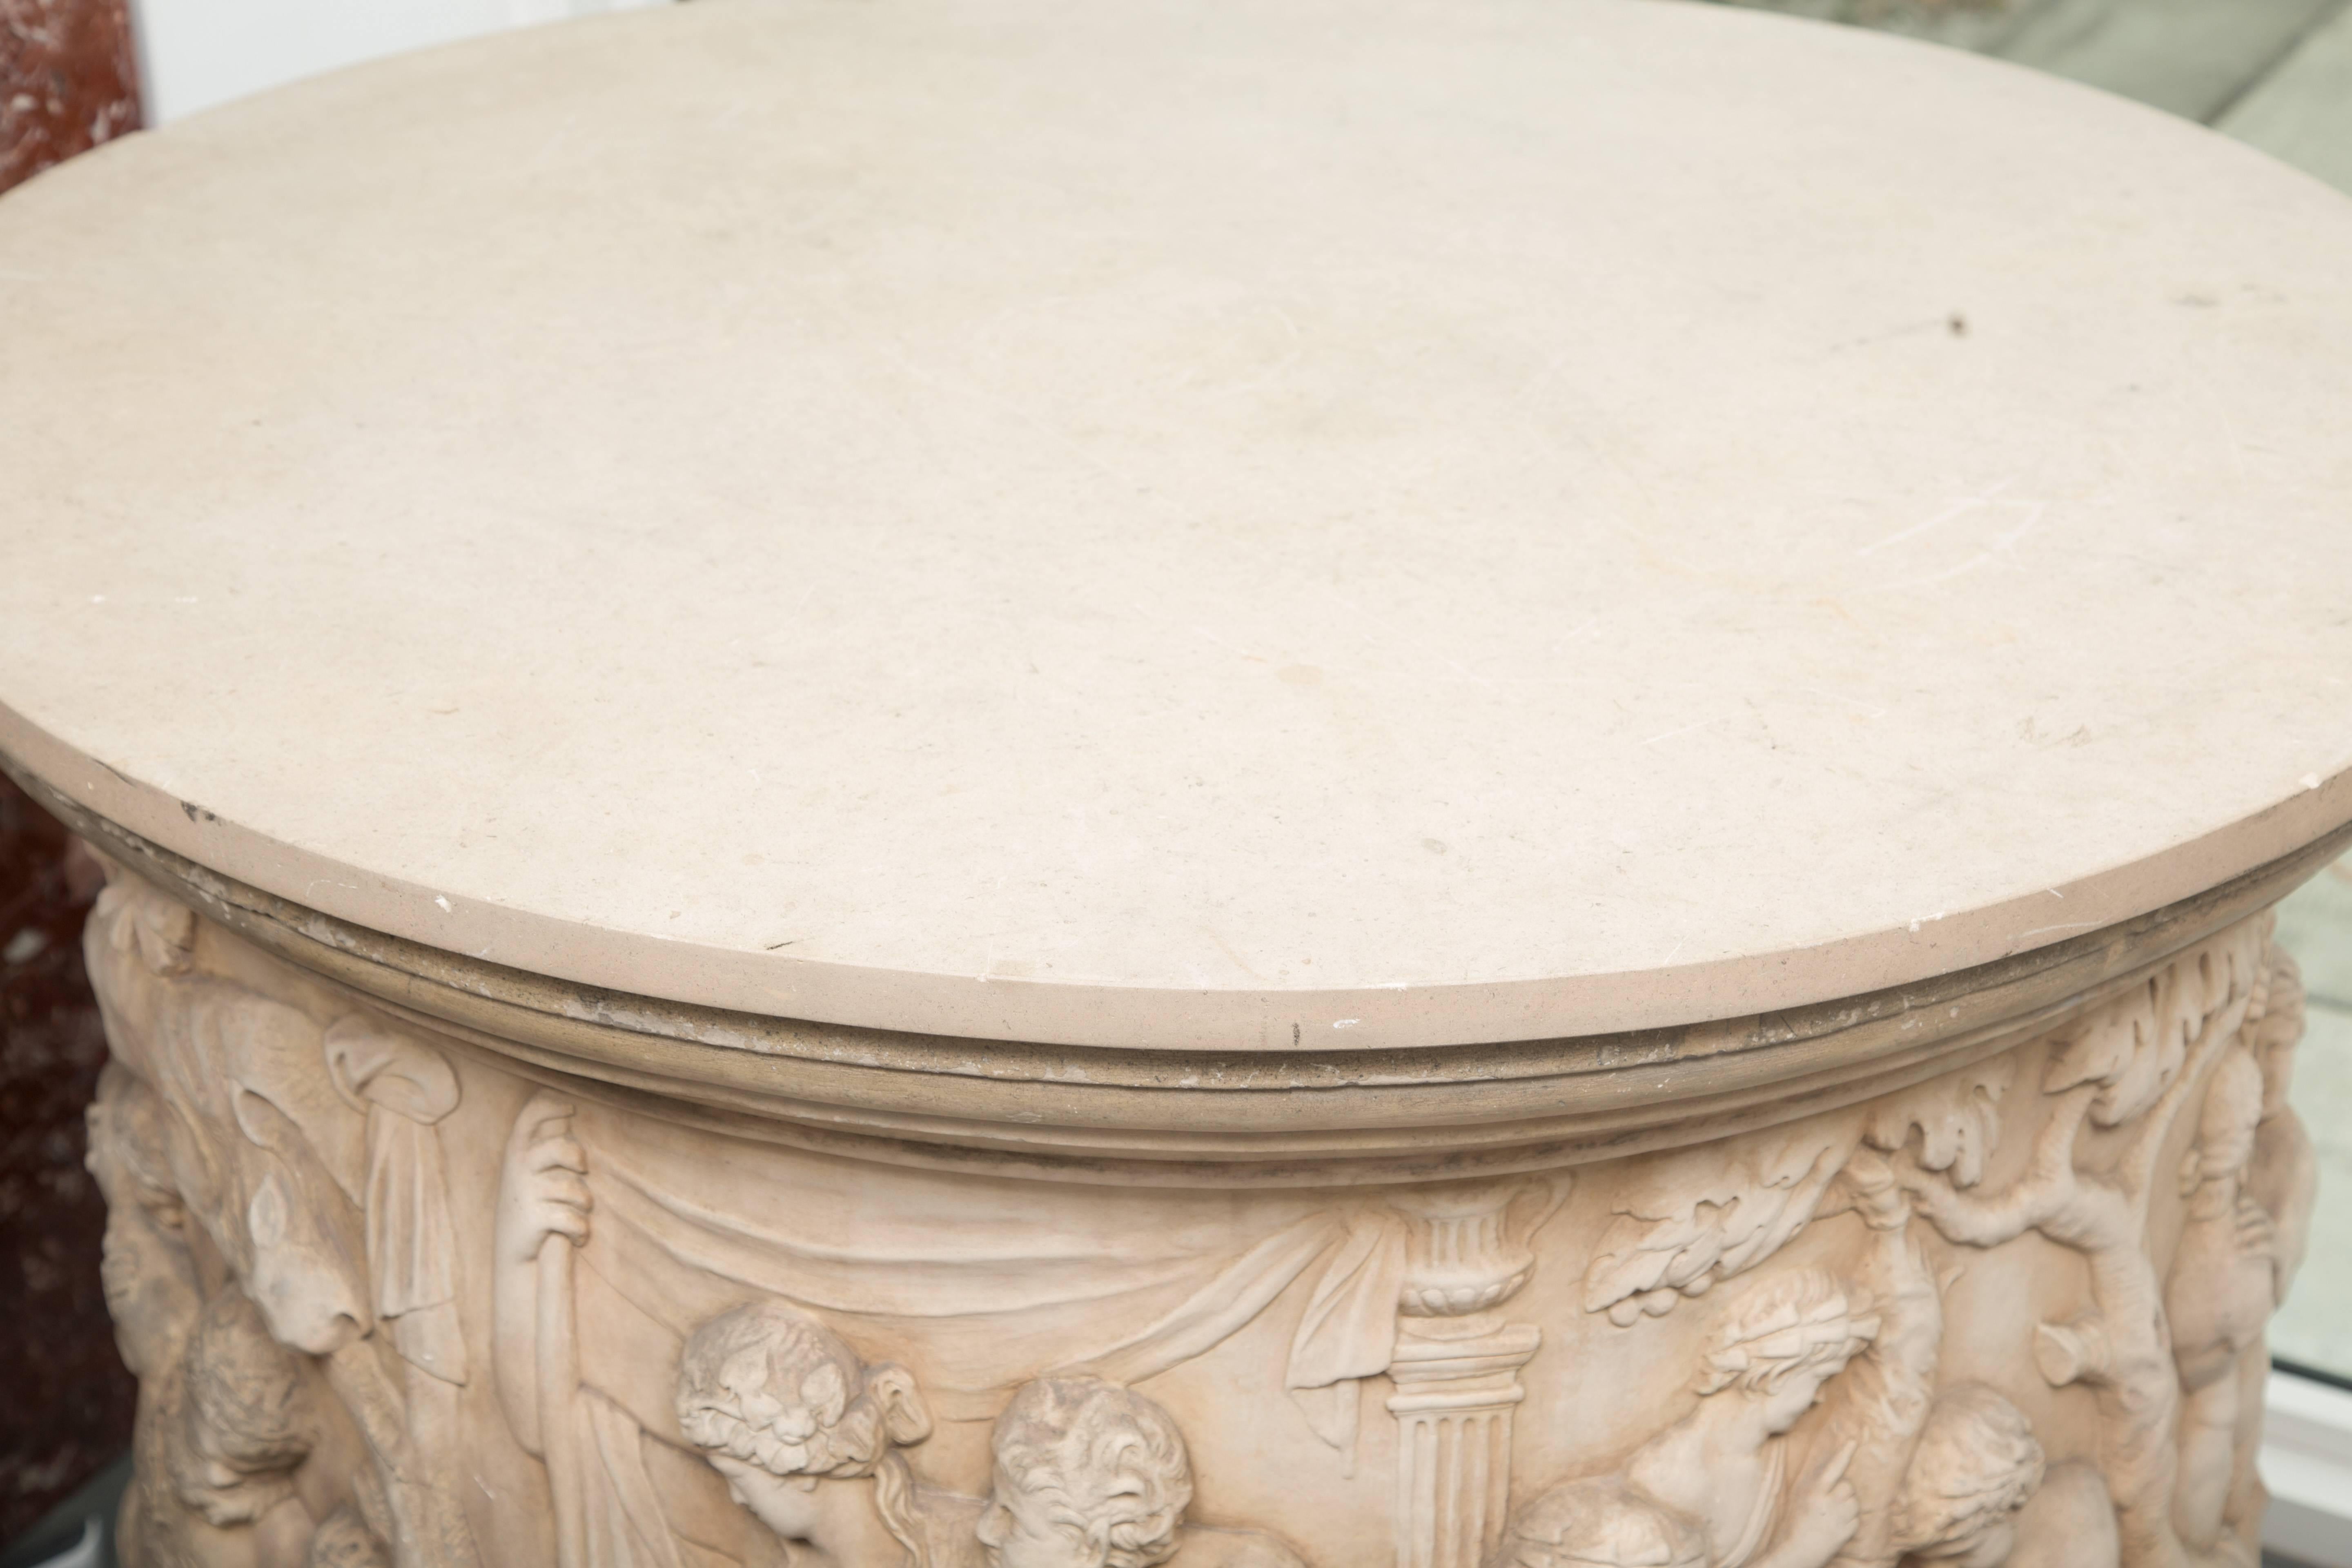 This impressive circular fountain has been assembled as a center table with later lime stone top. The item depicts classic figures in naturalistic vignettes representing various lifestyles. 20th century.